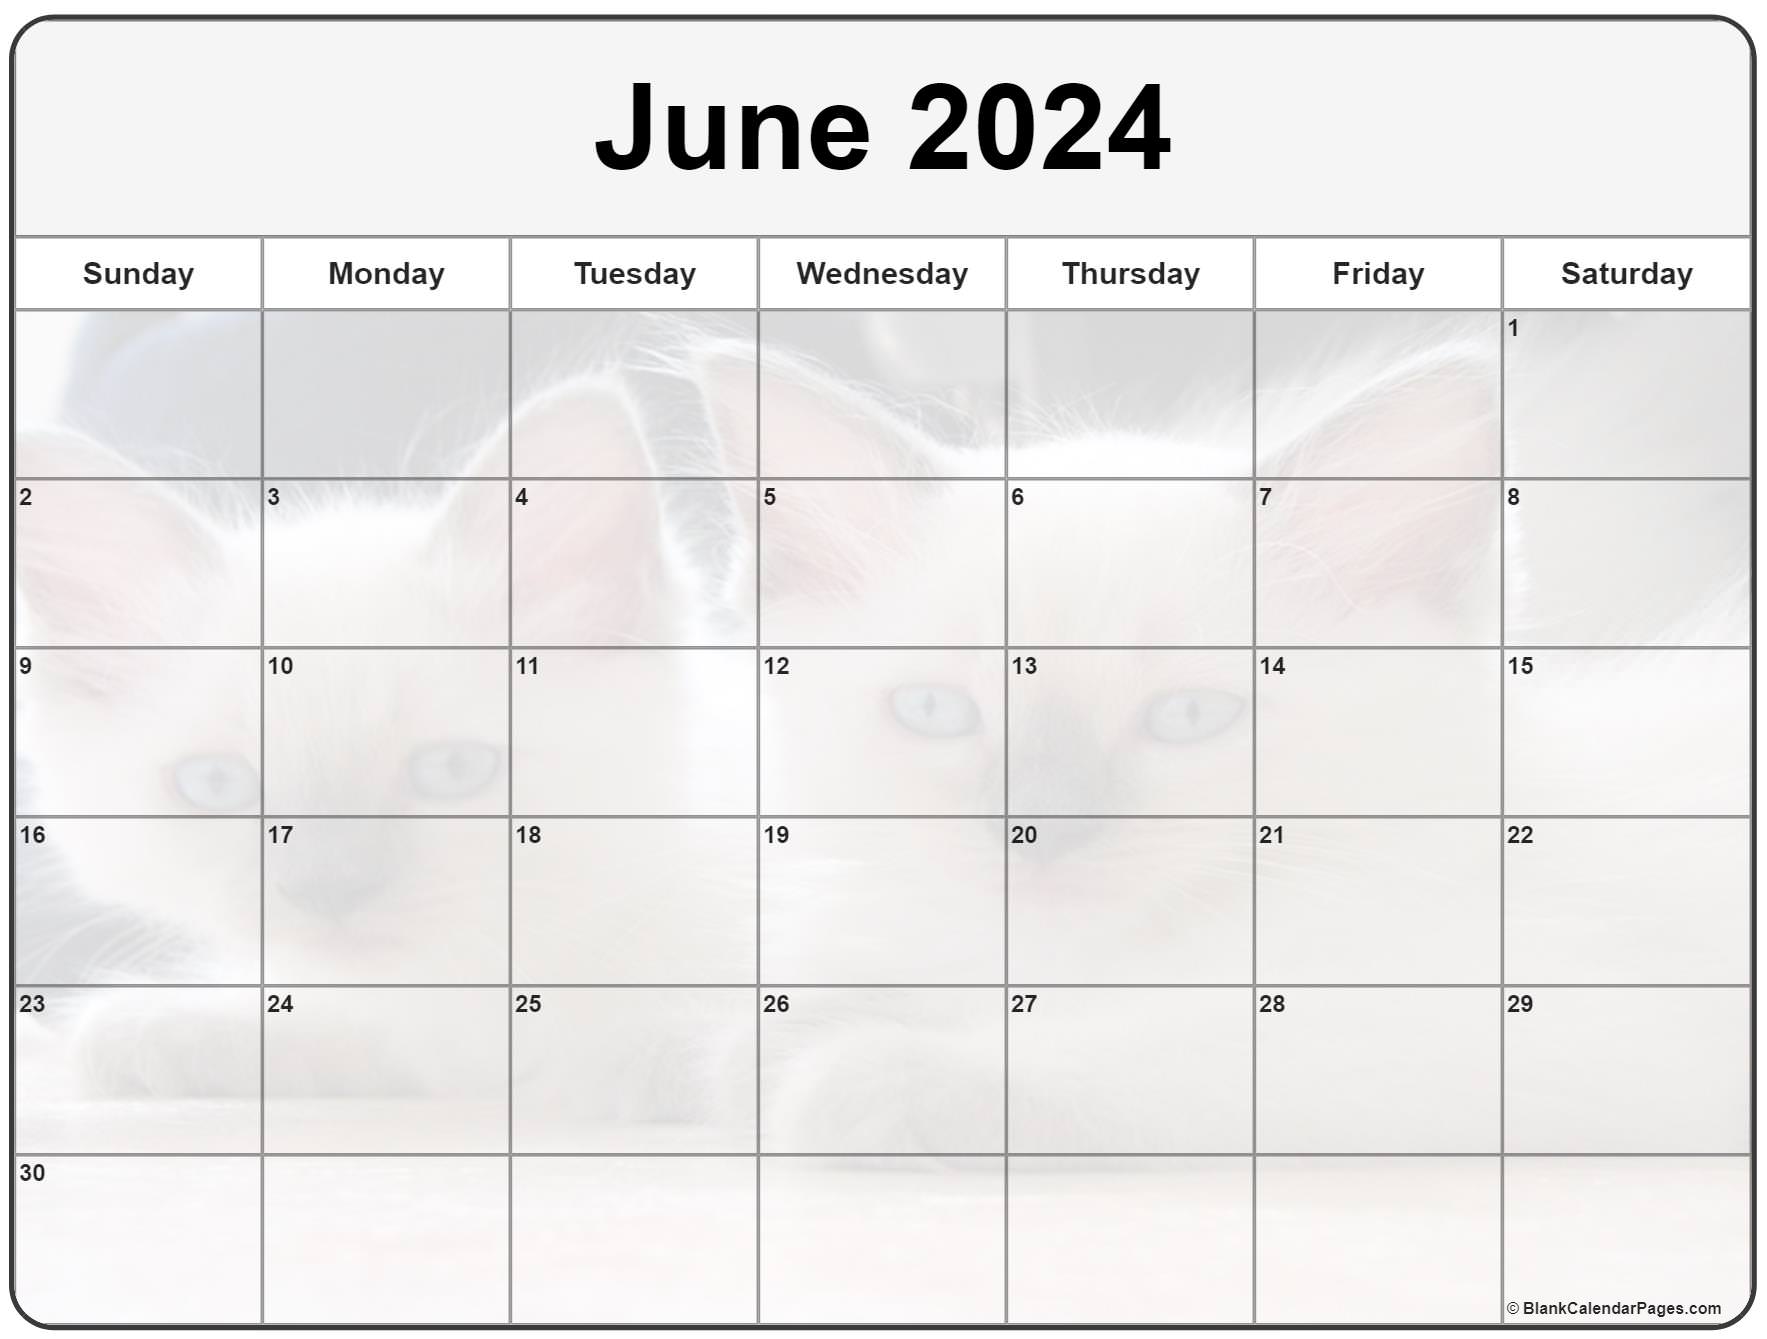 Collection of June 2022 photo calendars with image filters.